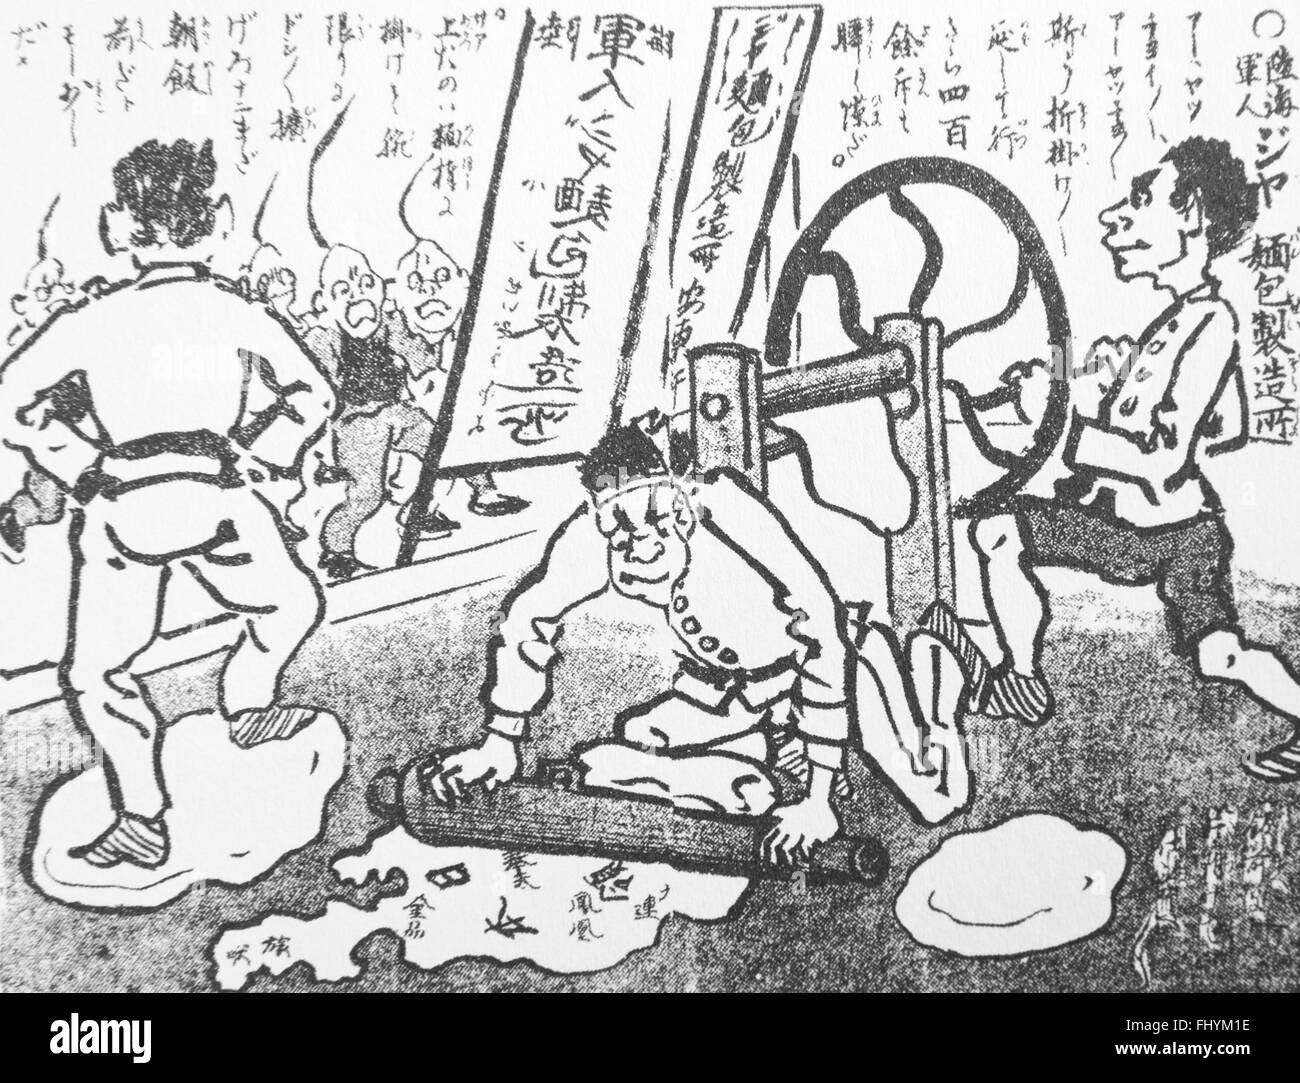 Japanese soldiers making bread. Stock Photo